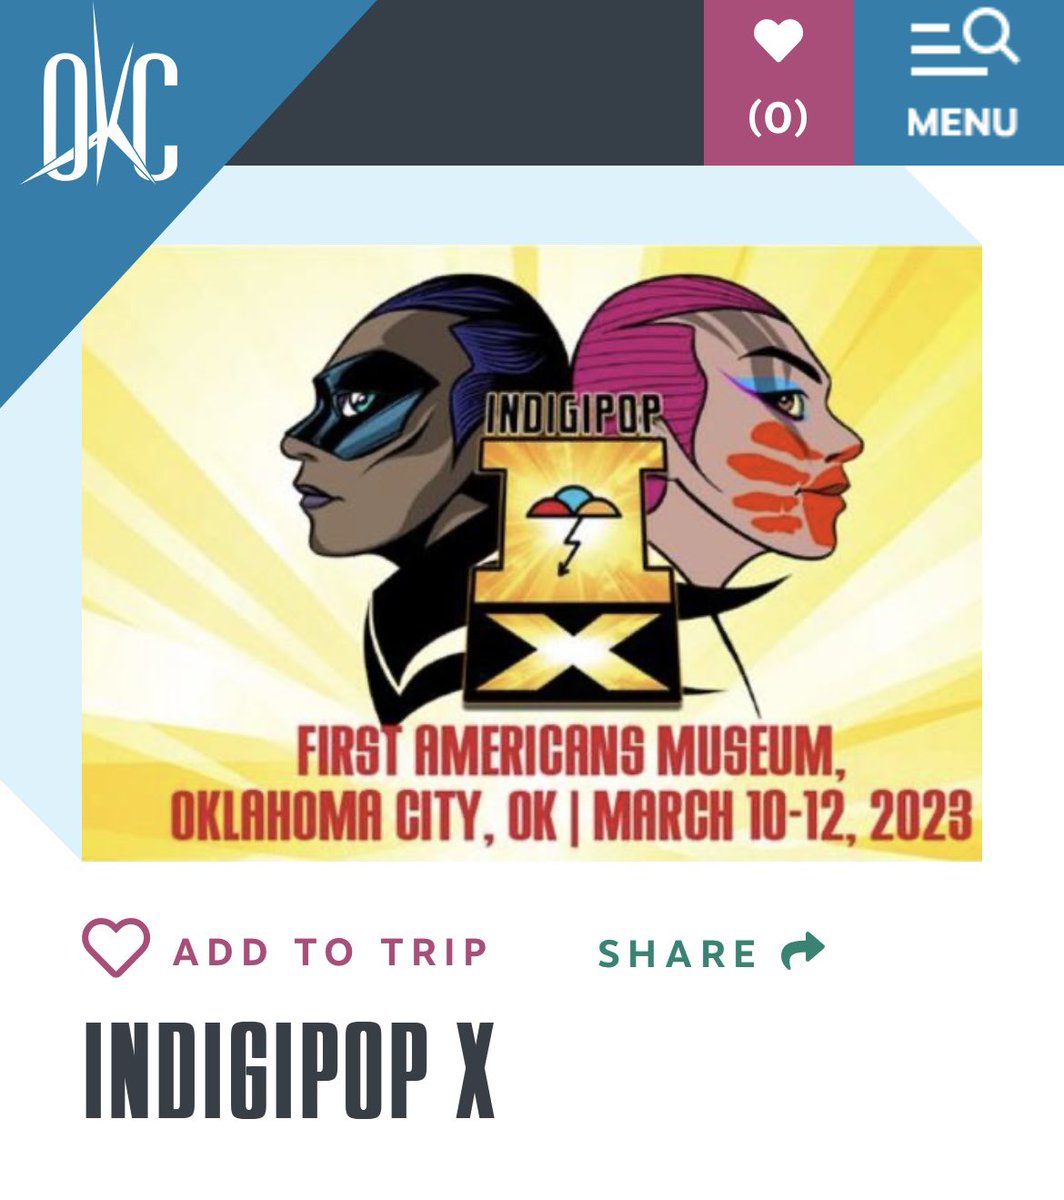 Thanks to @VisitOKC for the mention on your website of all things Oklahoma City! Excited for #IndigiPopX to #ReEmerge in OKC this weekend! 

visitokc.com/event/indigipo…